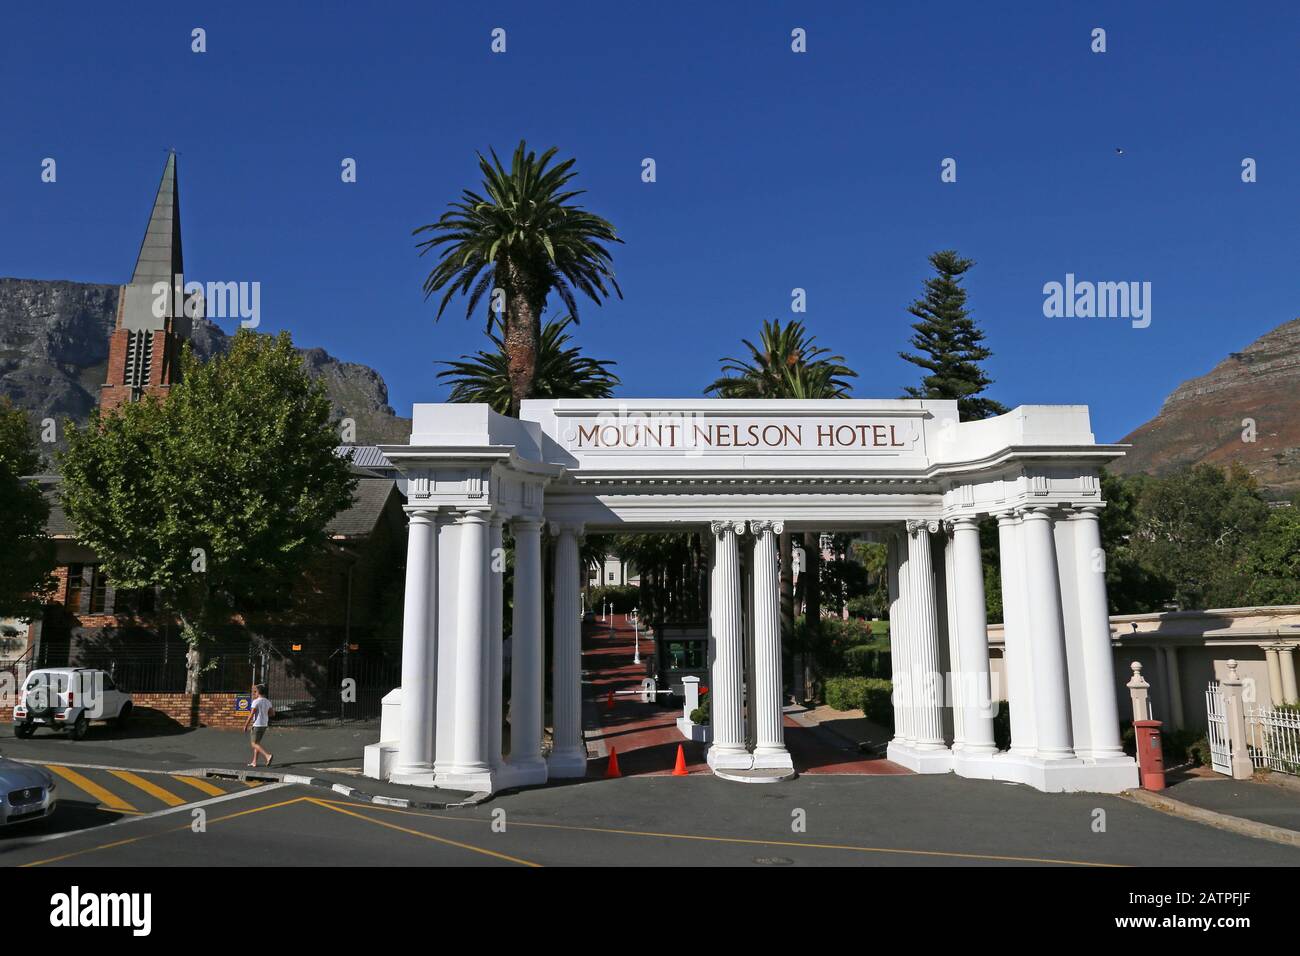 Entrance to Mount Nelson Hotel, Orange Street, Central Business District, Cape Town, Table Bay, Western Cape Province, South Africa, Africa Stock Photo